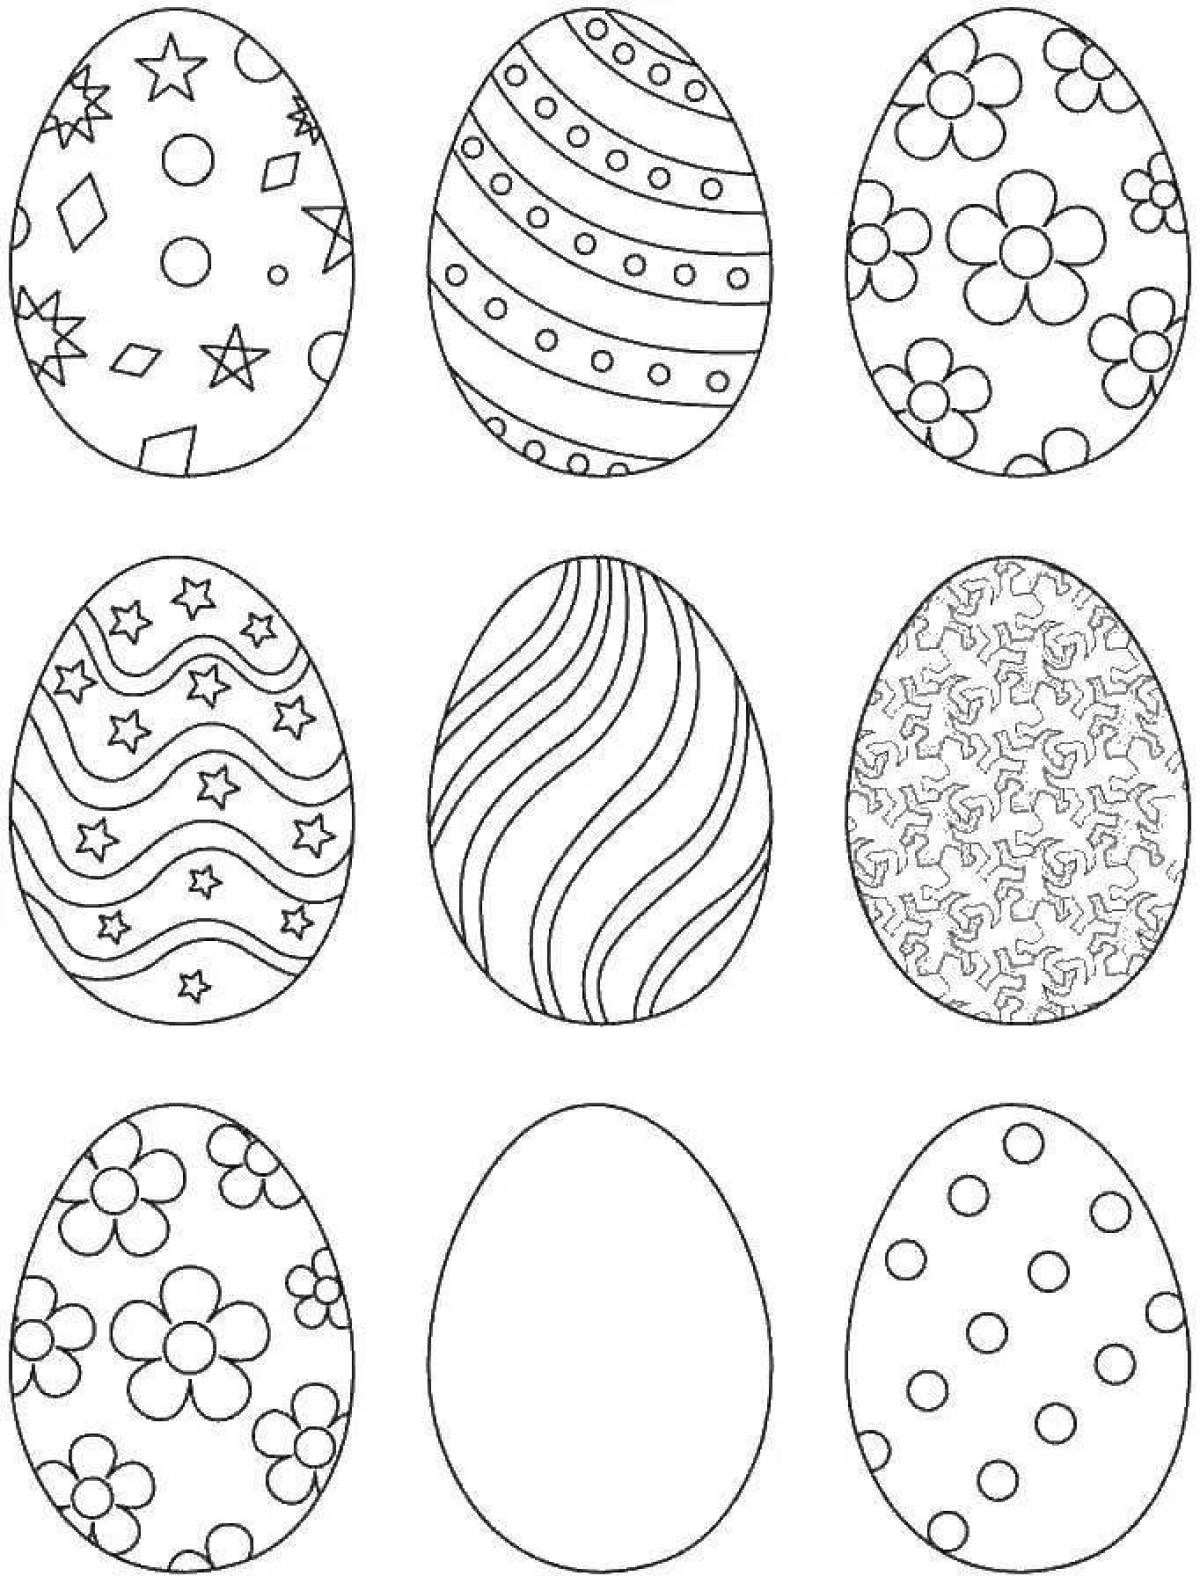 Amazing testicles coloring page